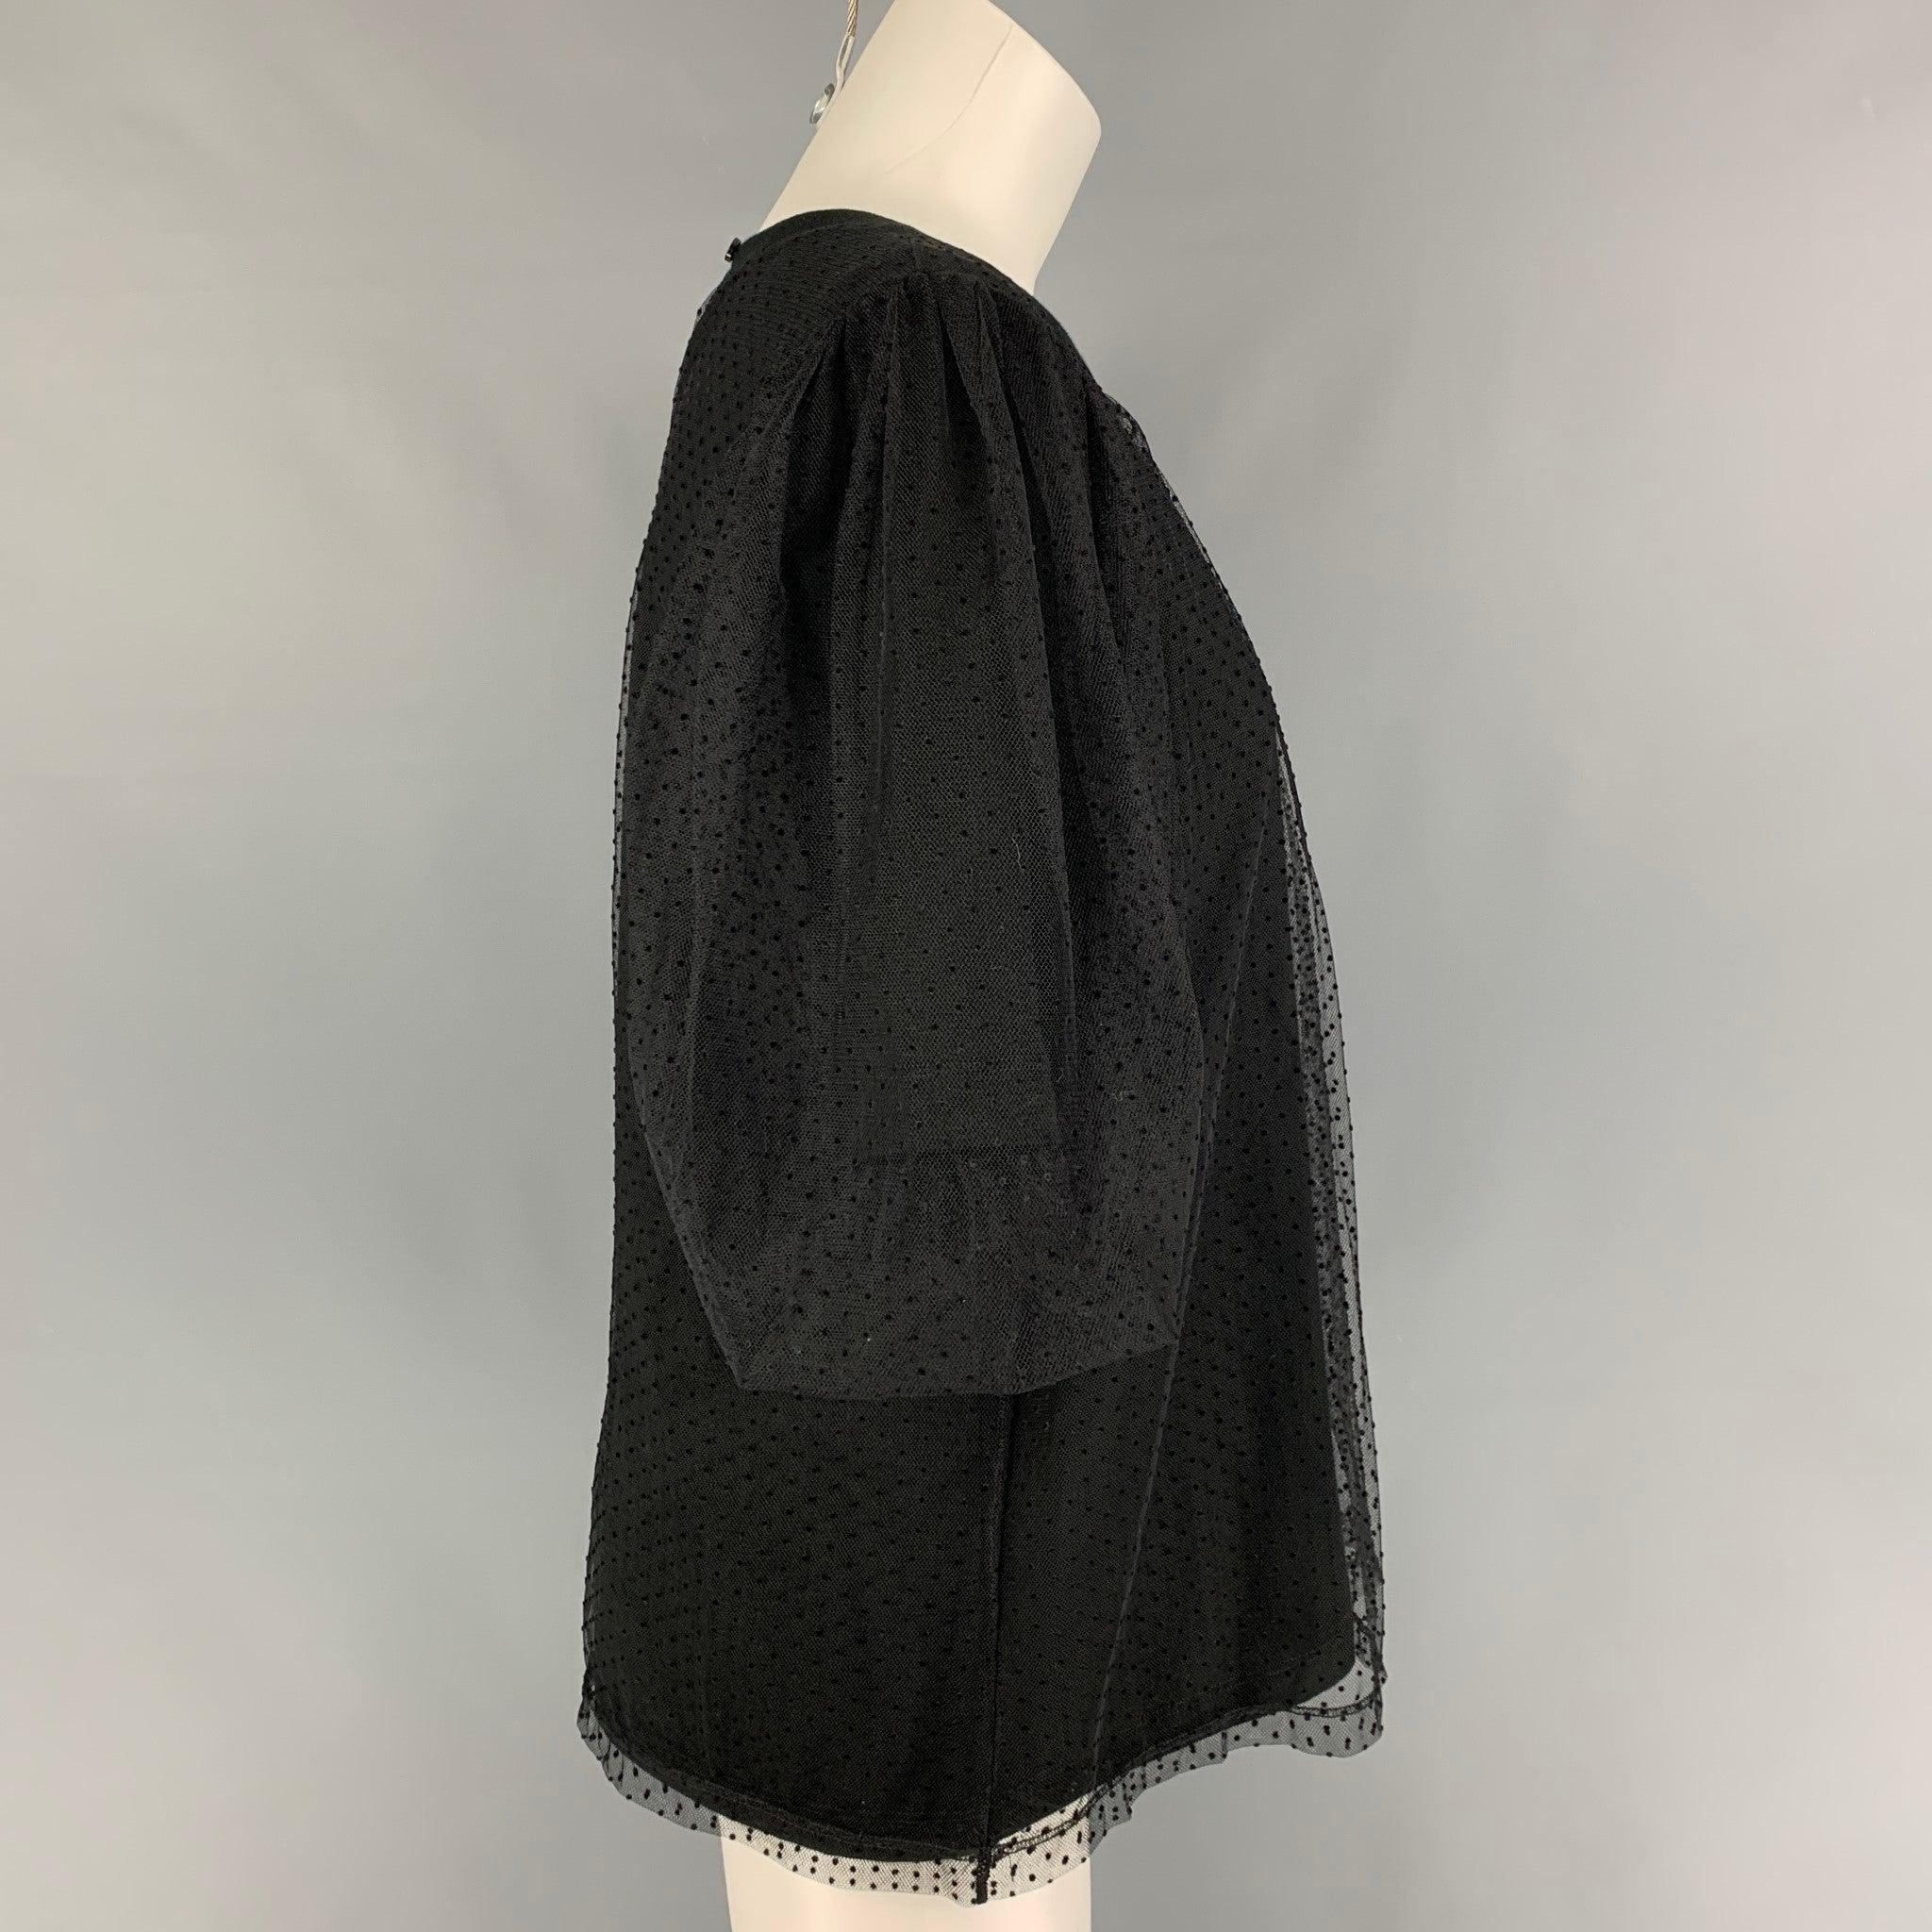 MARC JACOBS dress top comes in a black cotton featuring a lace layered design, short sleeves, and a back single button closure. Made in Italy.
Very Good
Pre-Owned Condition. 

Marked:   4 

Measurements: 
 
Shoulder: 15 inches  Bust: 40 inches 